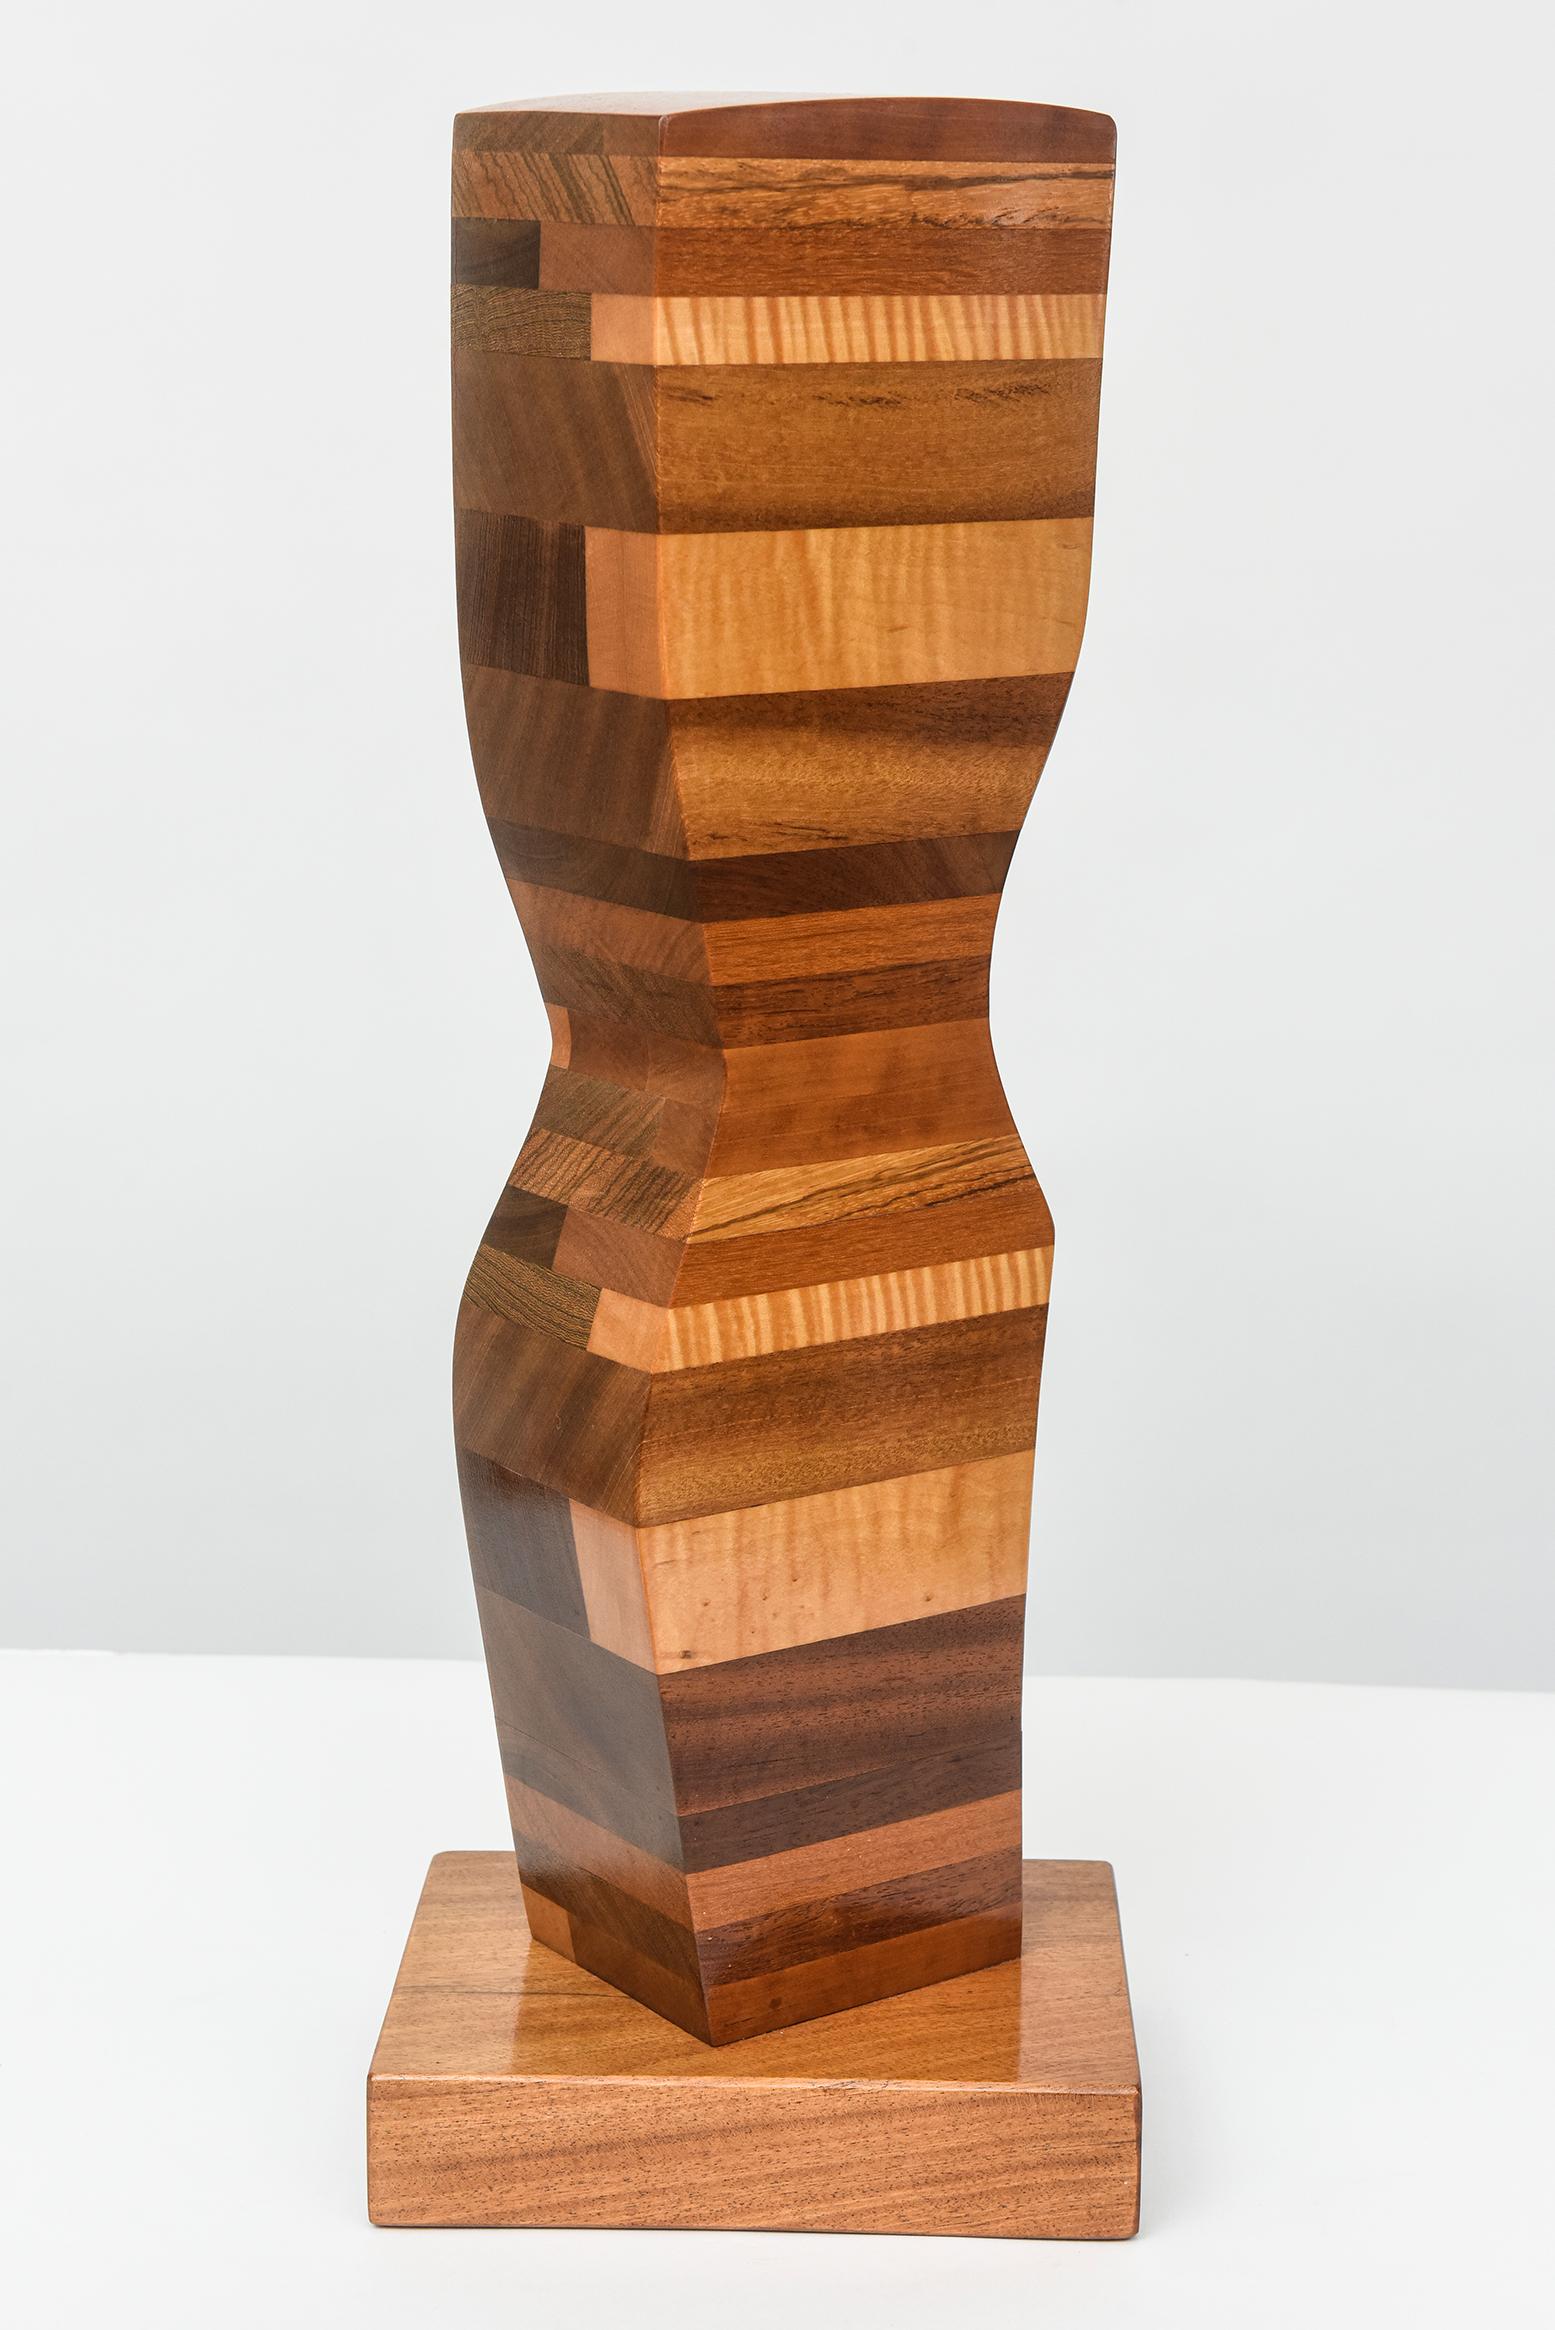 Two Modern Abstract Mixed Wood Studio Sculptures by Paul LaMontagne, C. 1980 For Sale 3